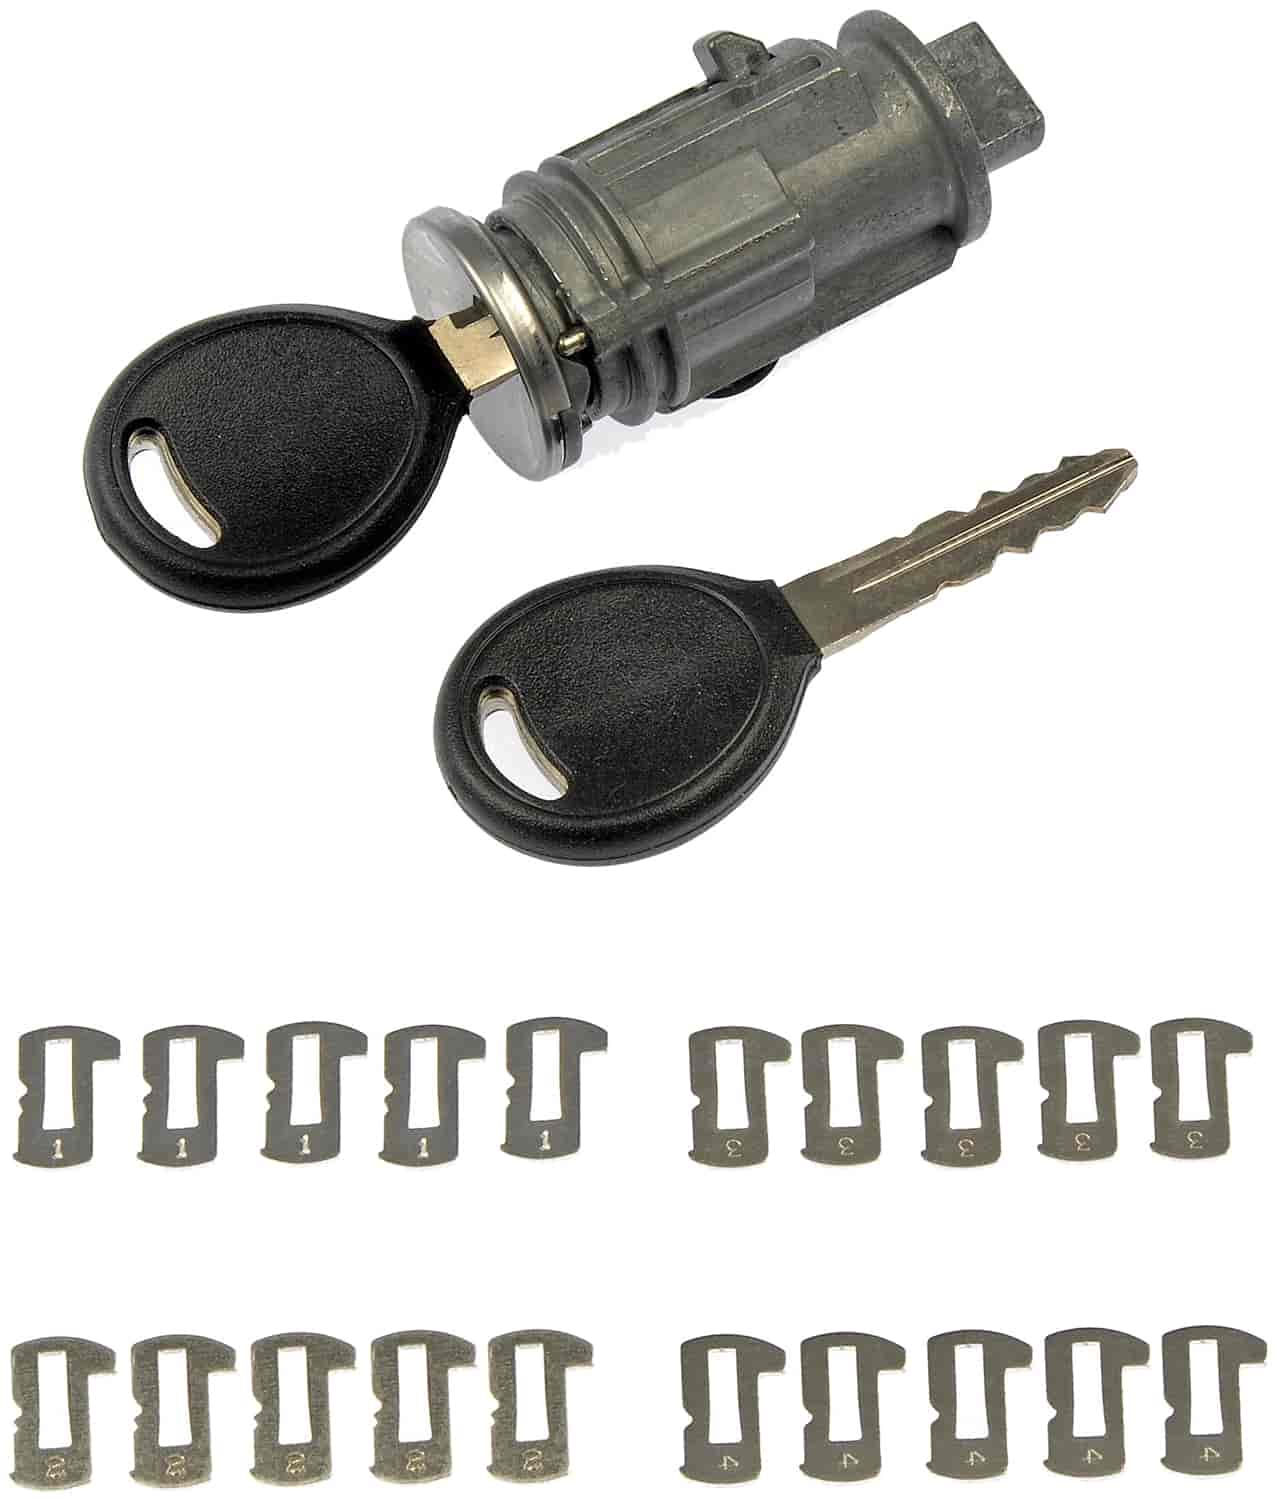 Ignition Lock Cylinder With Tumblers 1995-2008 Chrysler, 1997-2001 Plymouth, 1998-2006 Jeep, 1998-2010 Dodge